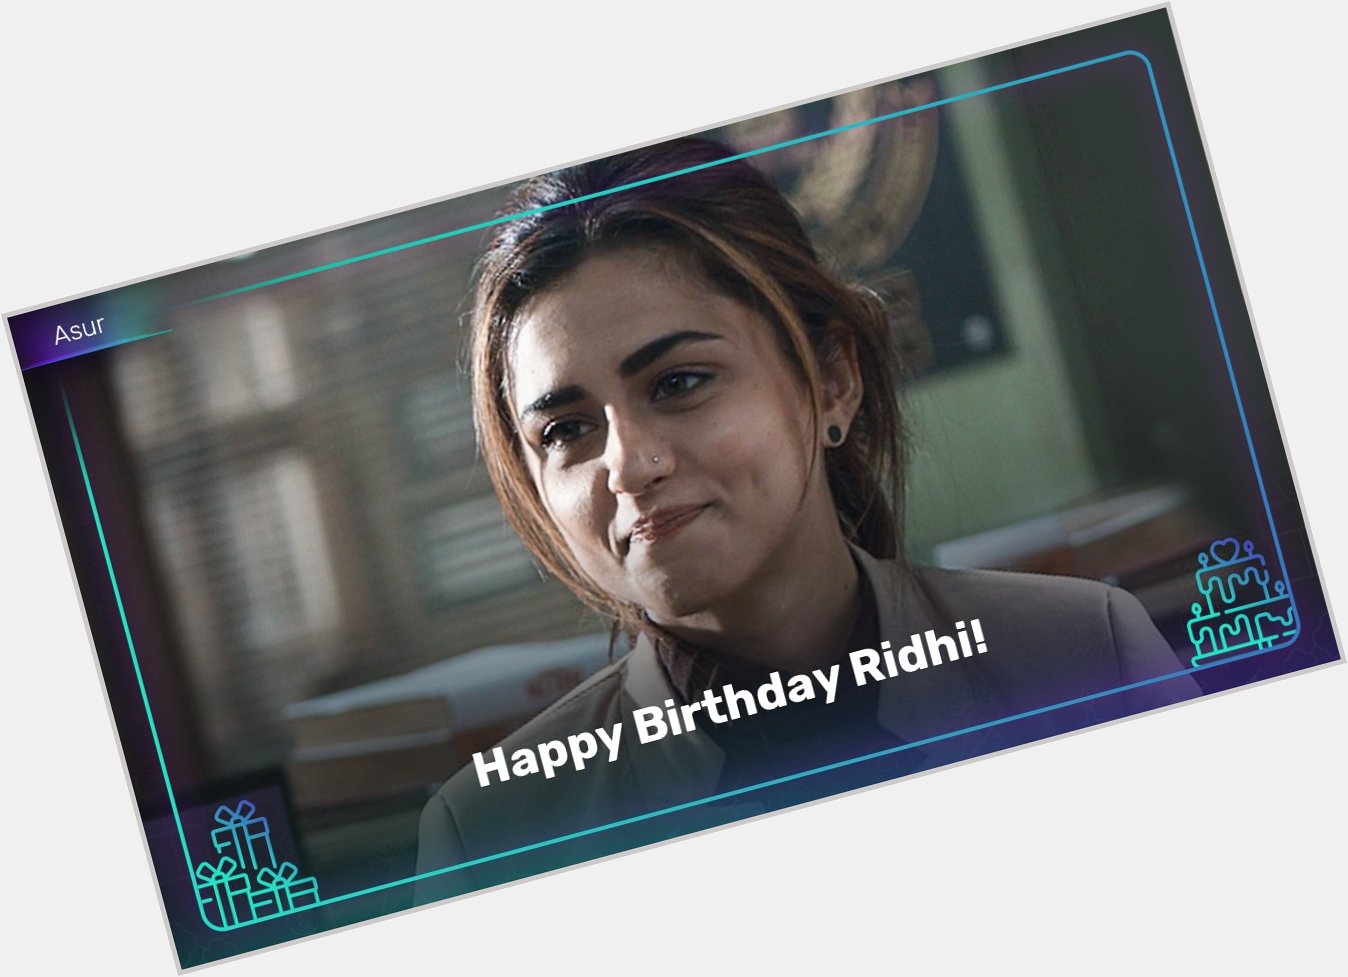 Are you Ridhi to party?
Happy Birthday Ridhi Dogra!   